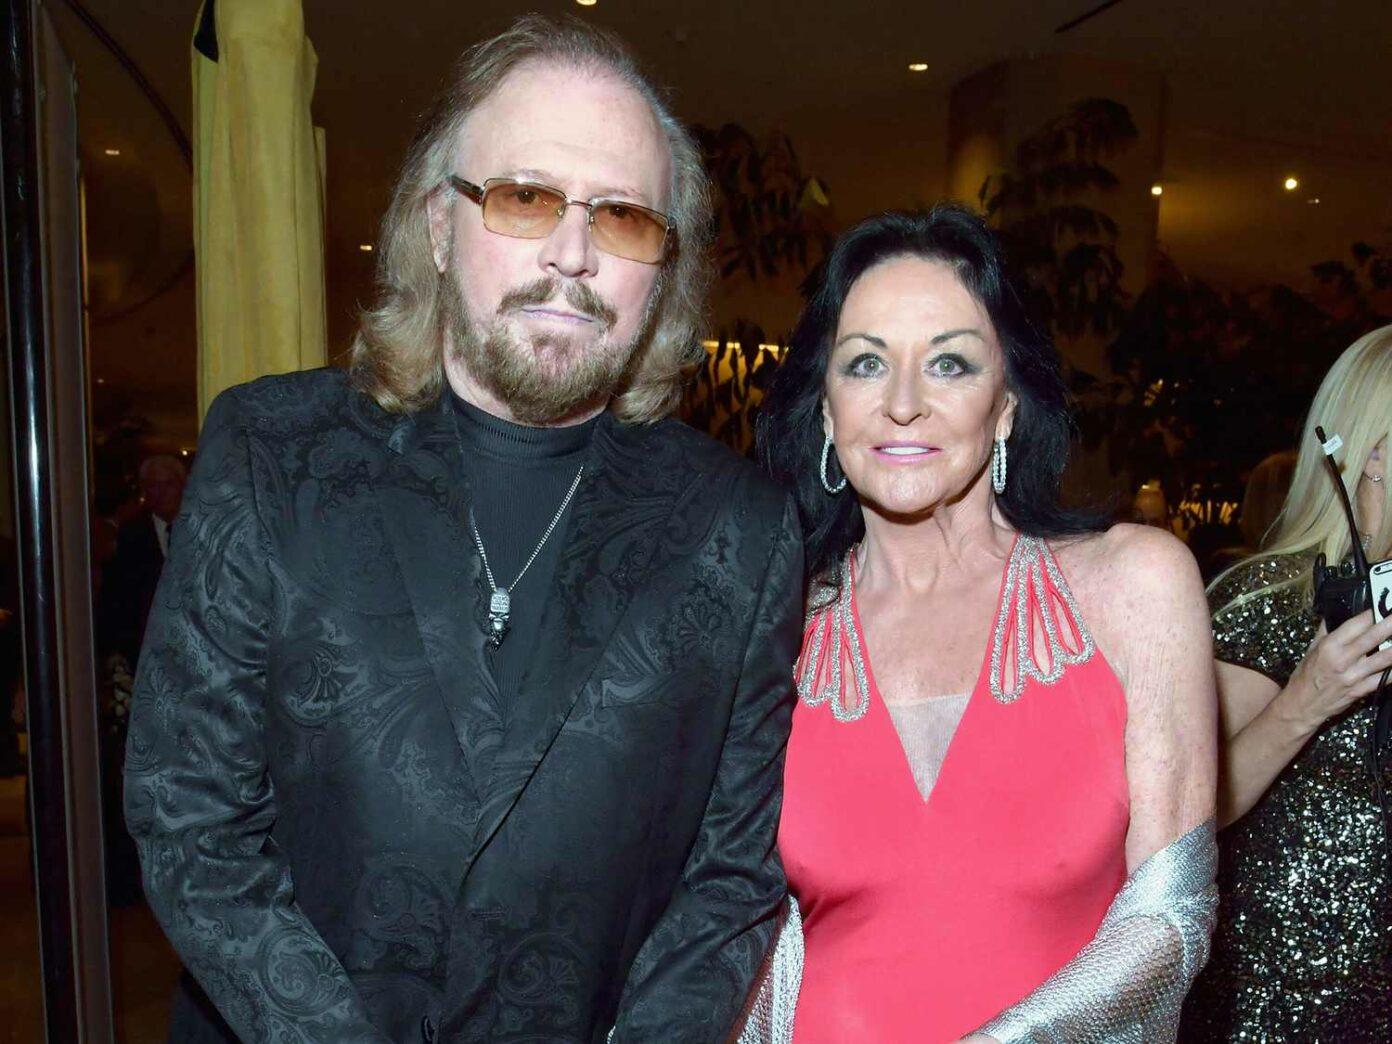 Barry Gibb World Age, Net Worth, Wife, Kids and More Uncovered!